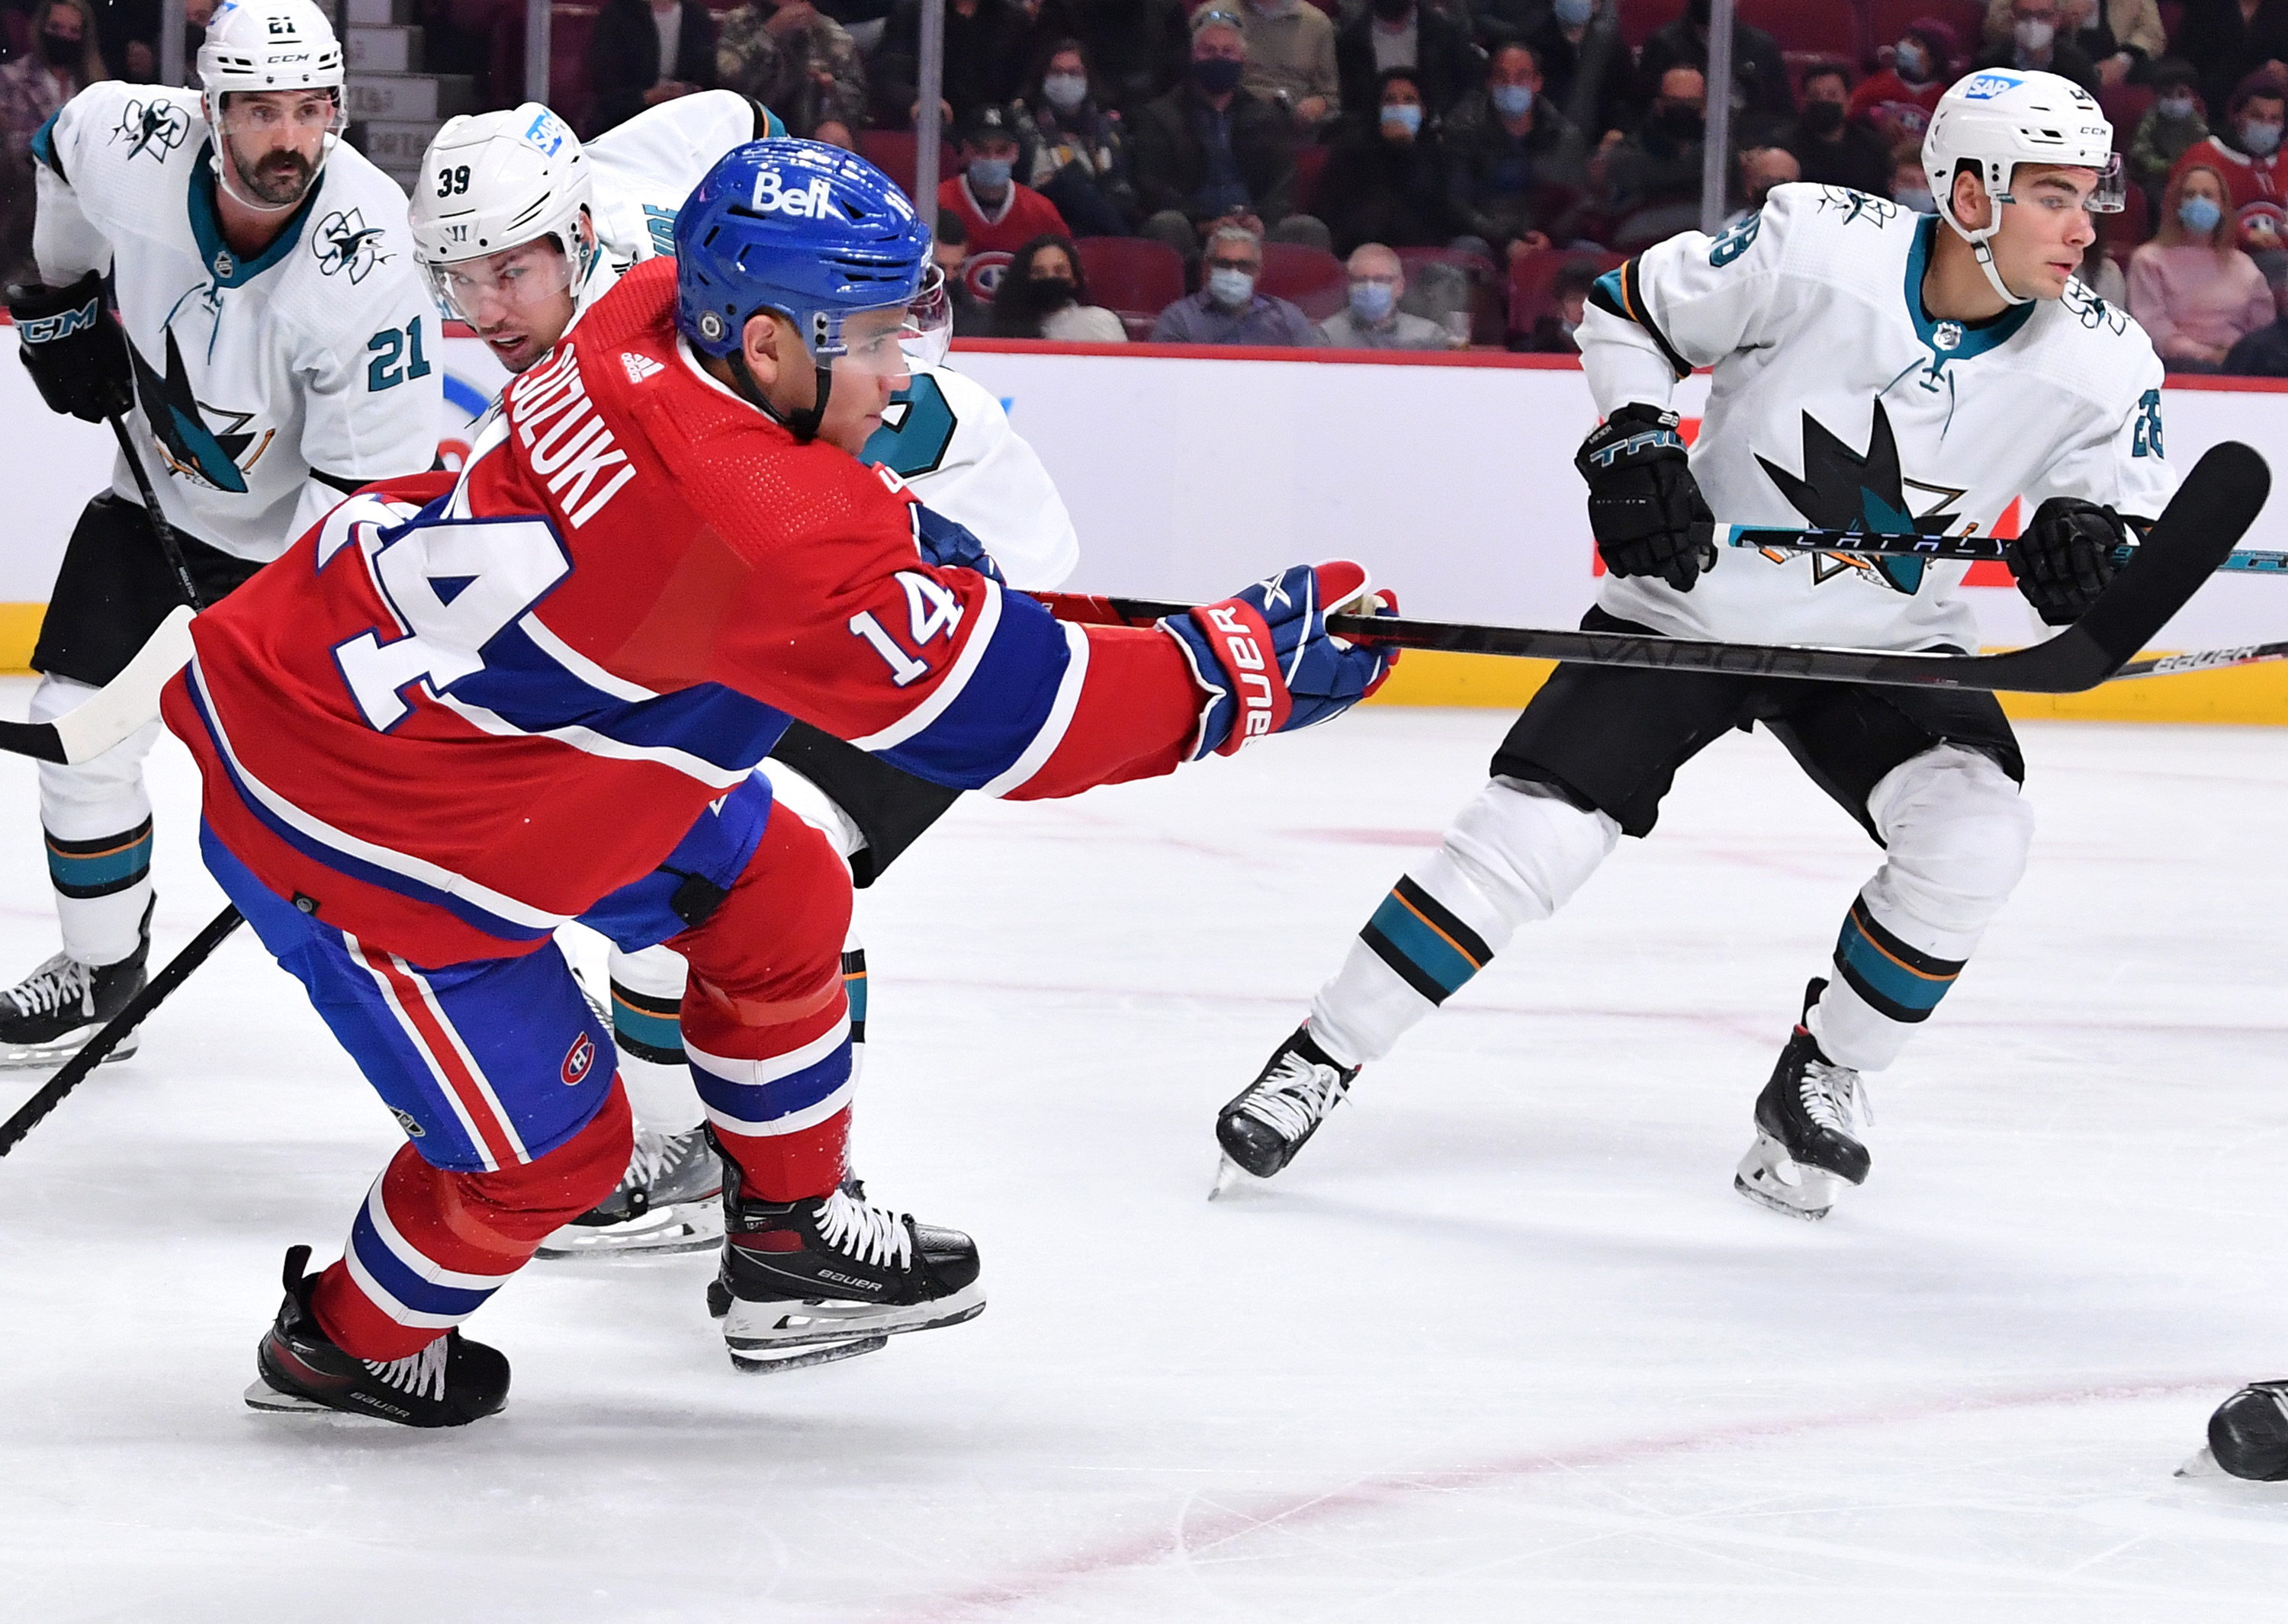 Nick Suzuki #14 of the Montreal Canadiens passes the puck against the San Jose Sharks in the NHL game at the Bell Centre on October 19, 2021 in Montreal, Quebec, Canada.